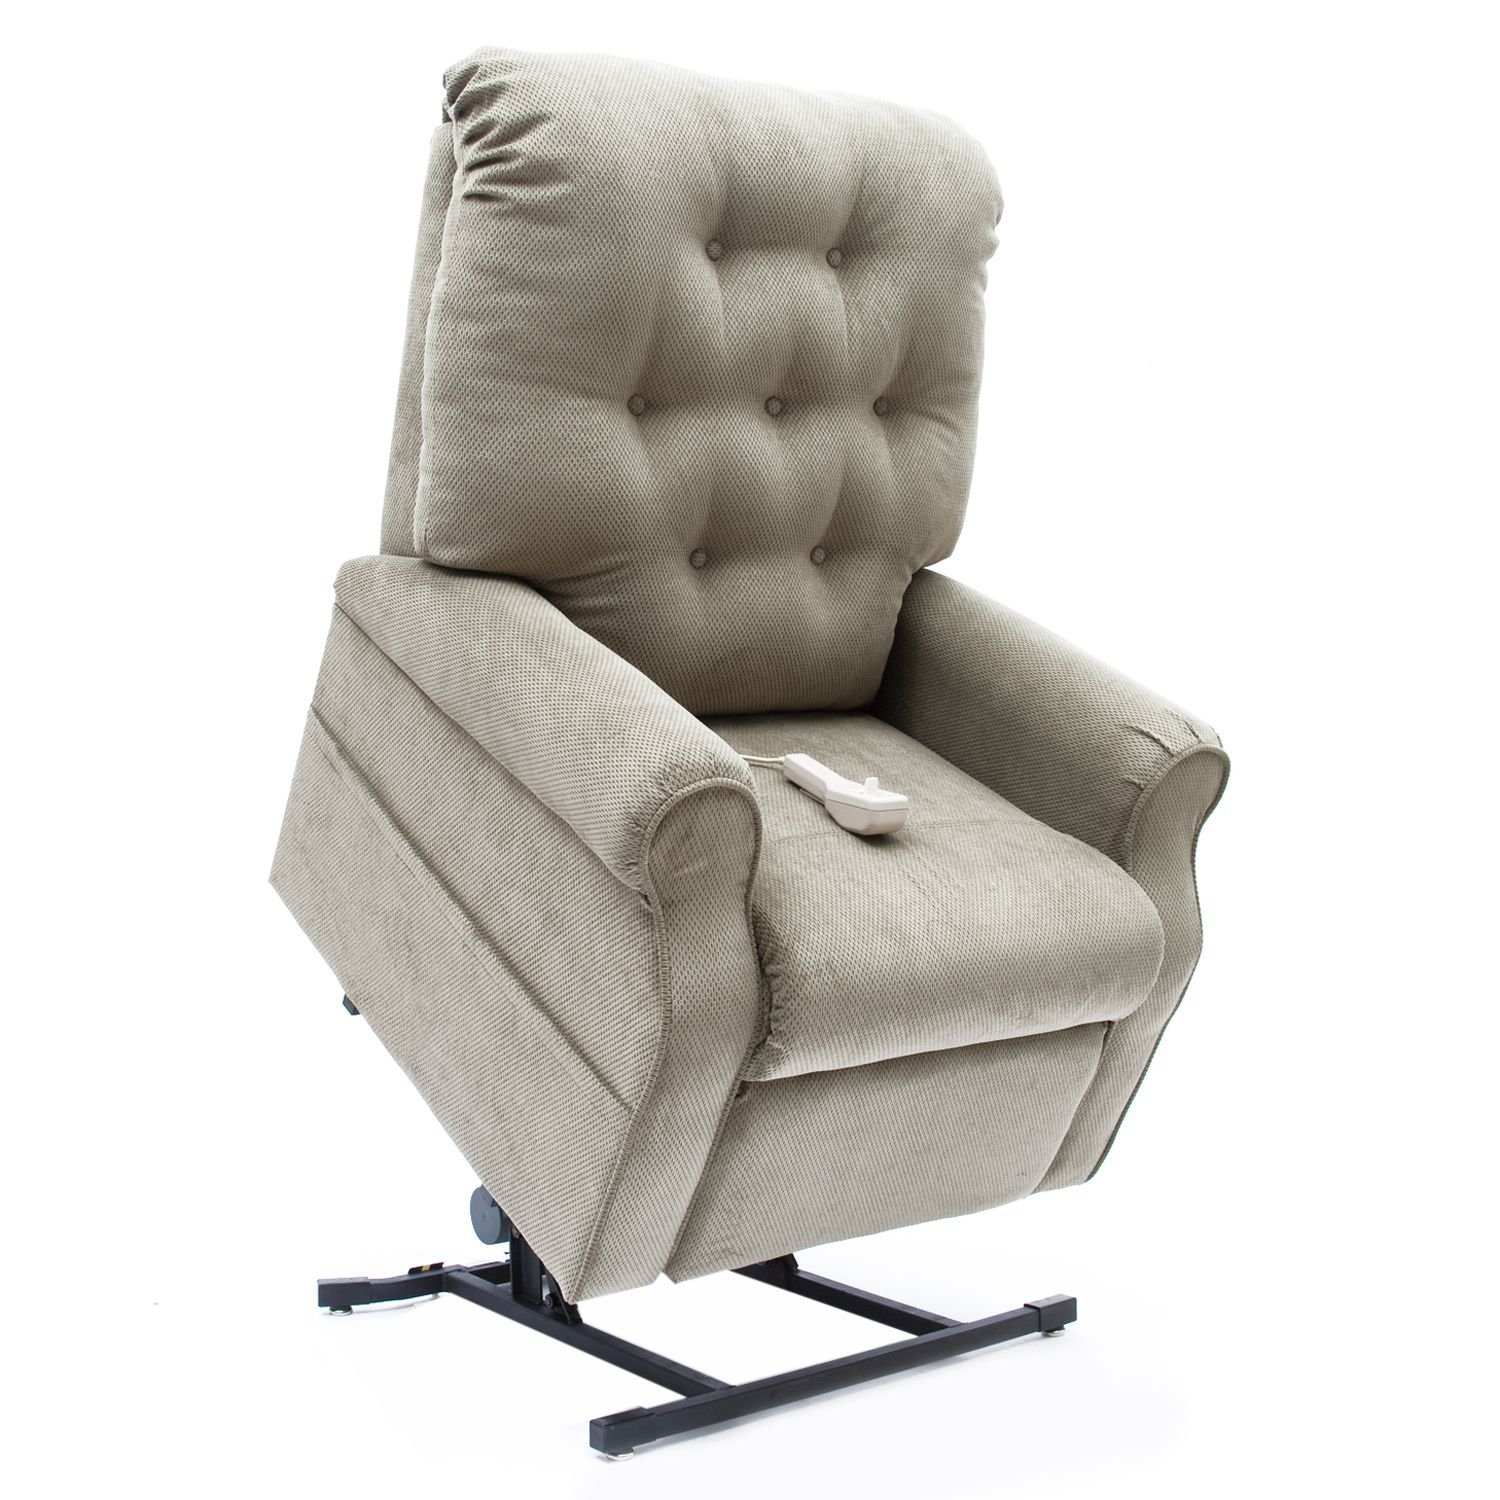 Display On Wholesale Remote Control For Lift Chair And Recliner